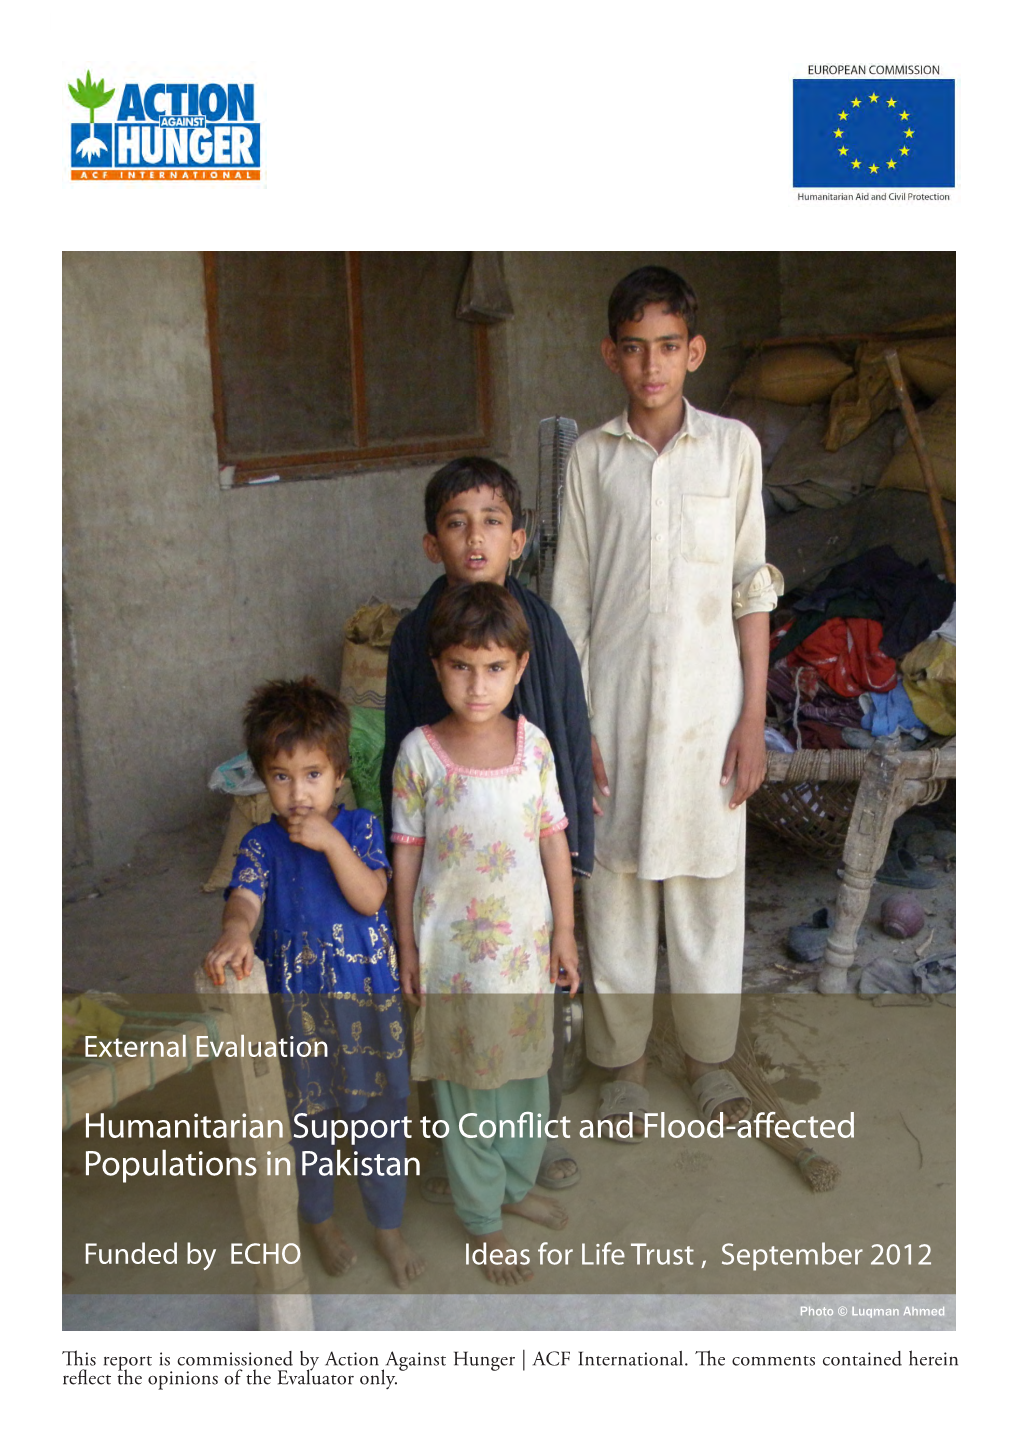 Humanitarian Support to Conflict and Flood-Affected Populations in Pakistan